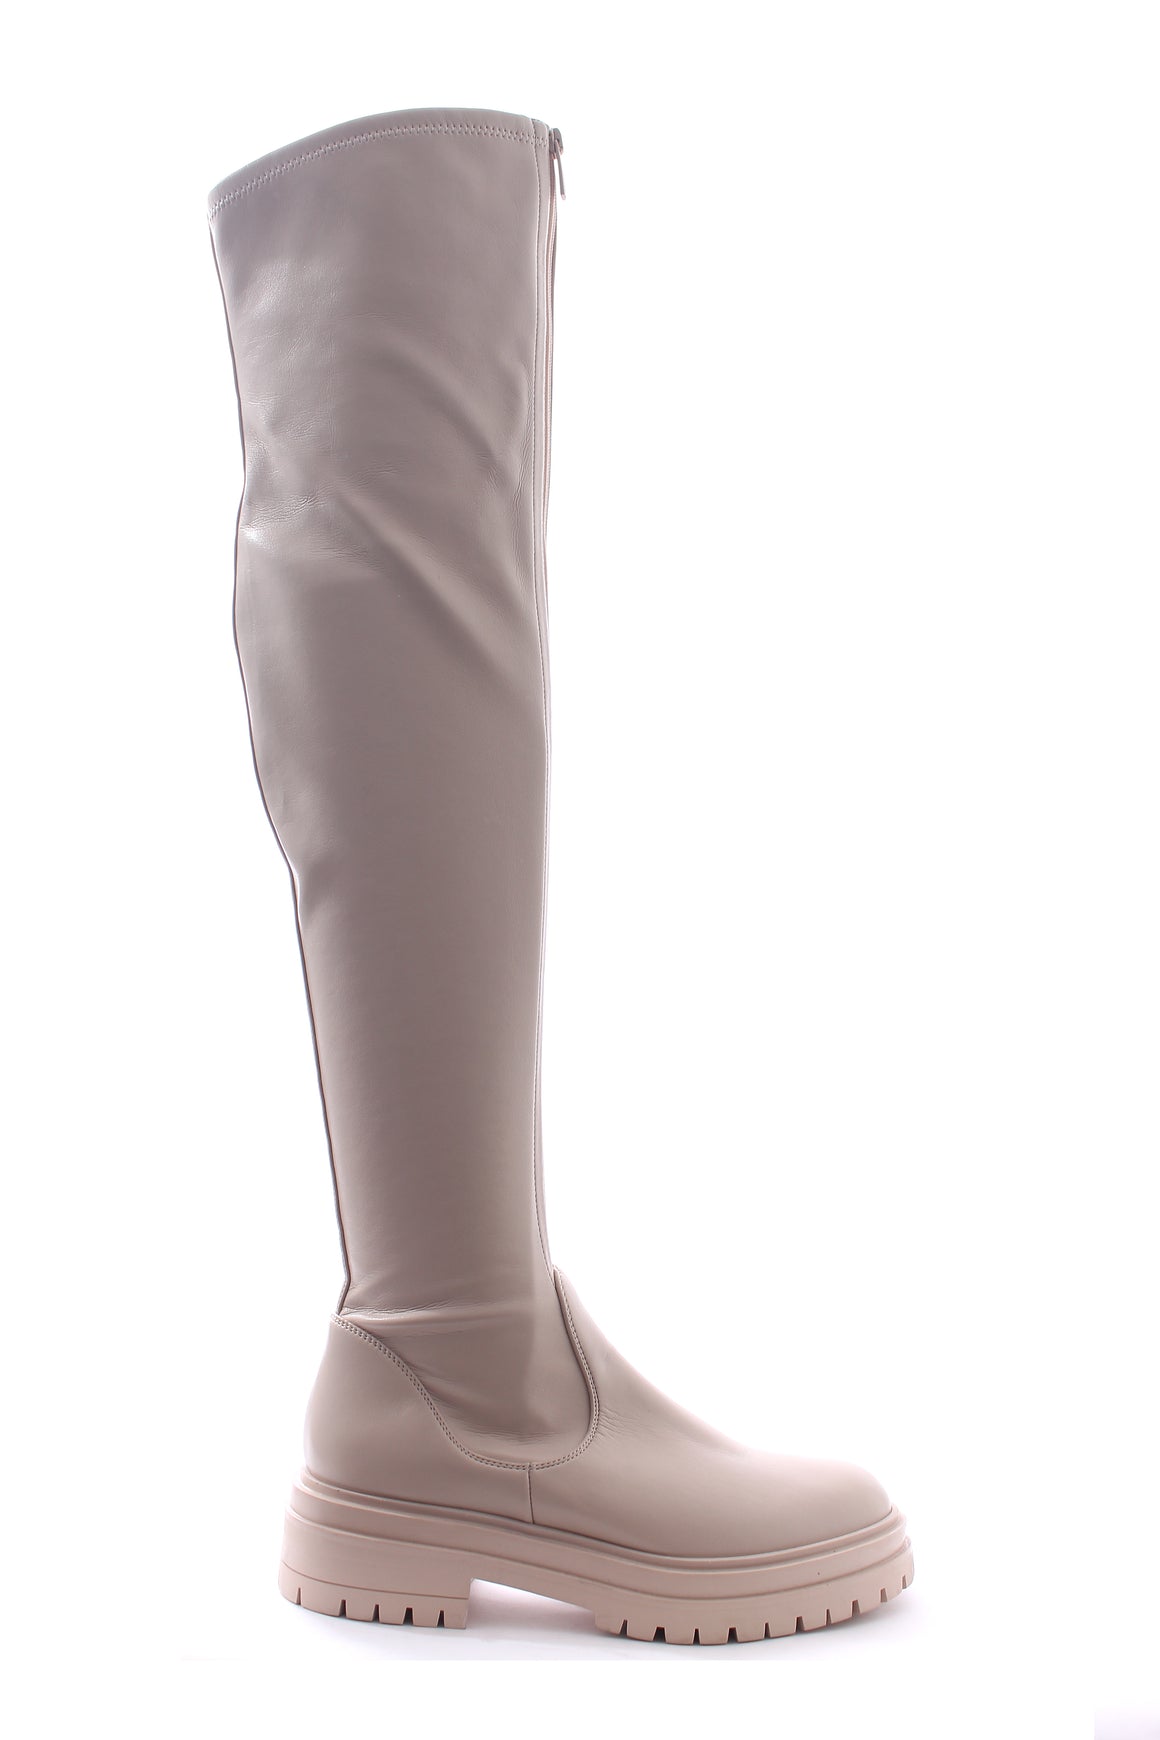 Gianvito Rossi Marsden 20 Faux Leather Over-the-knee Boots